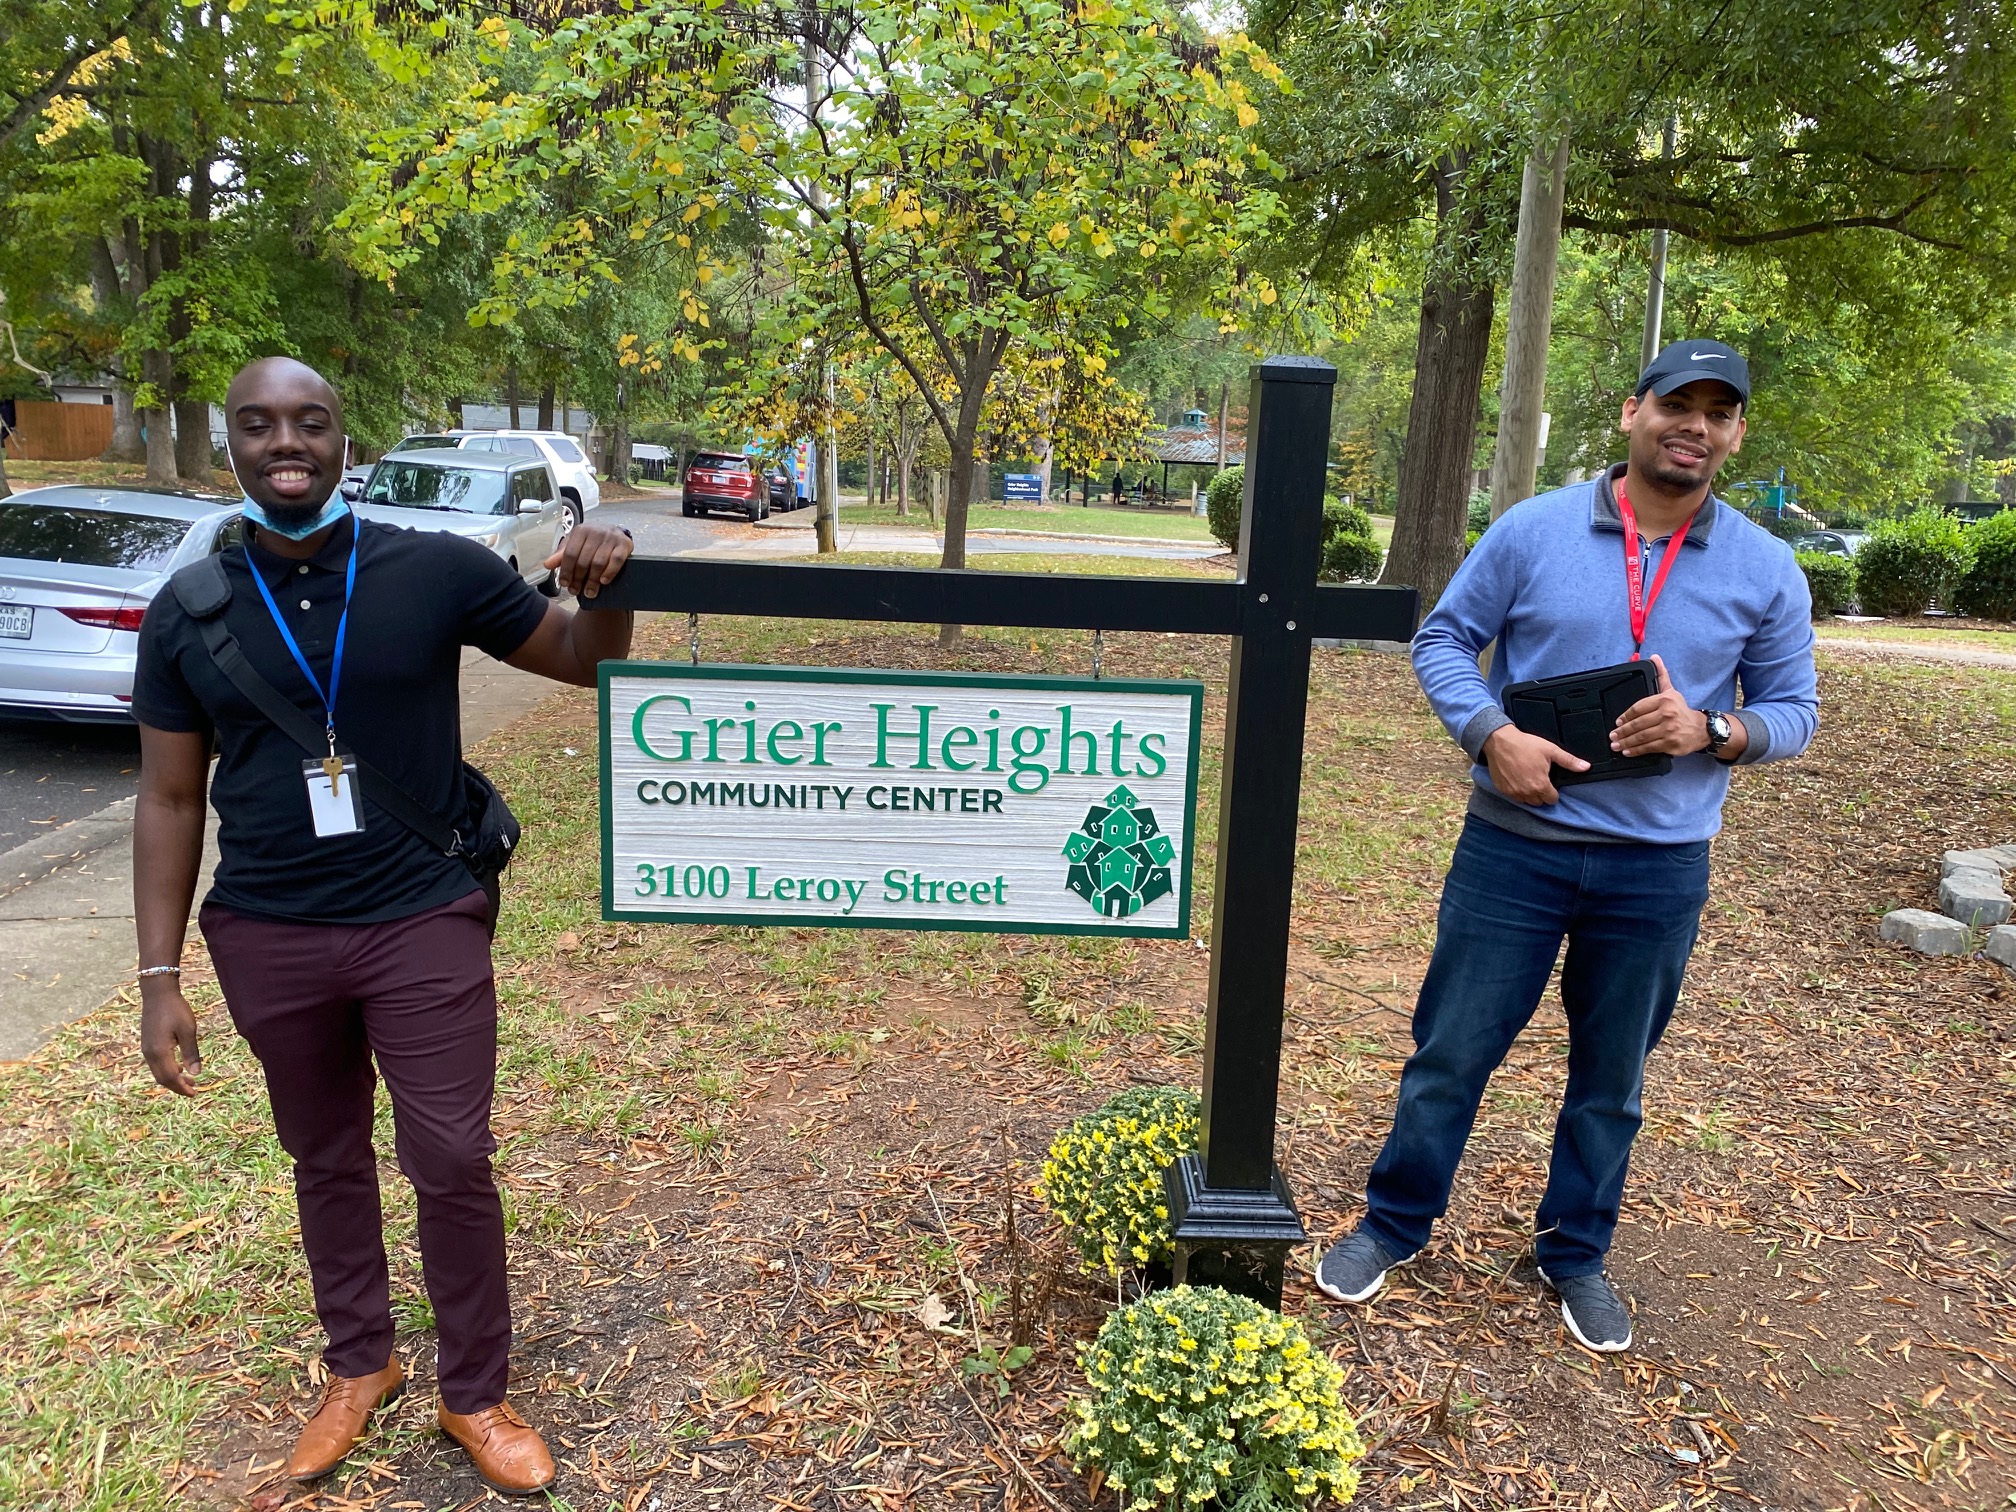 Care Ring Community Health Workers Sunday Shobowale (l) and Miguel Garcia (r) at Grier Heights Community Center